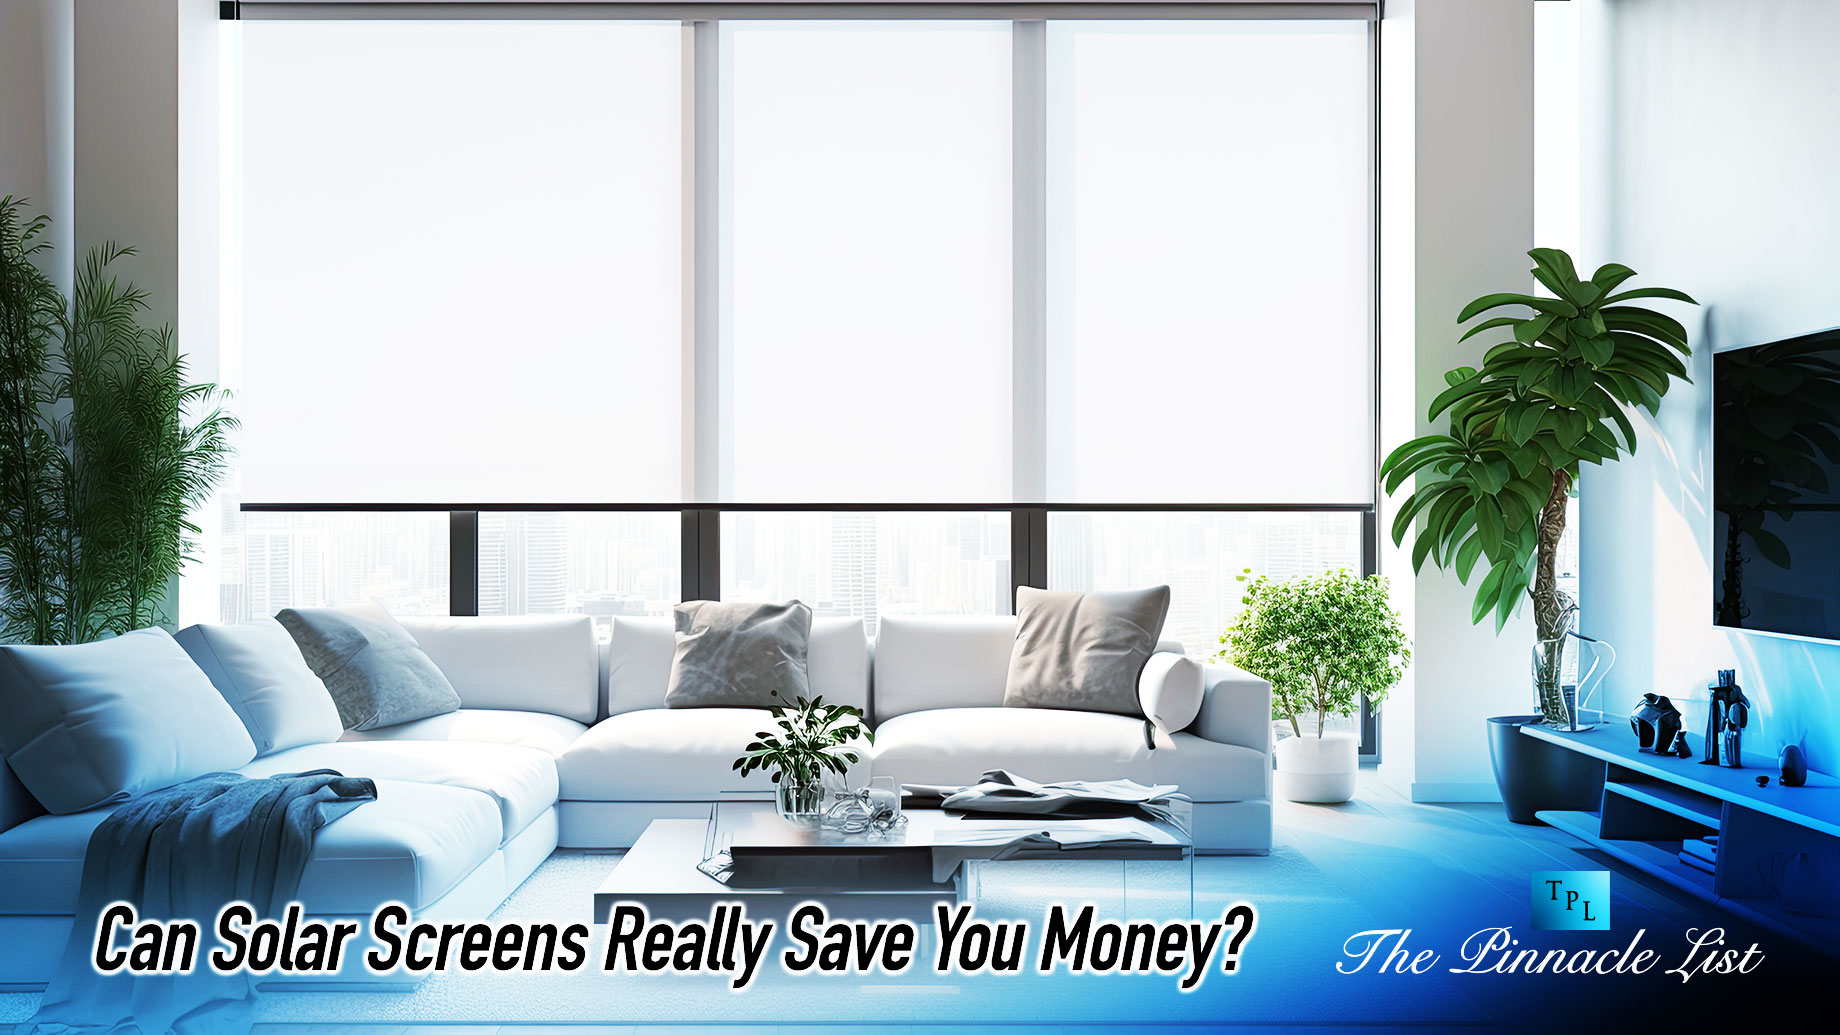 Can Solar Screens Really Save You Money?